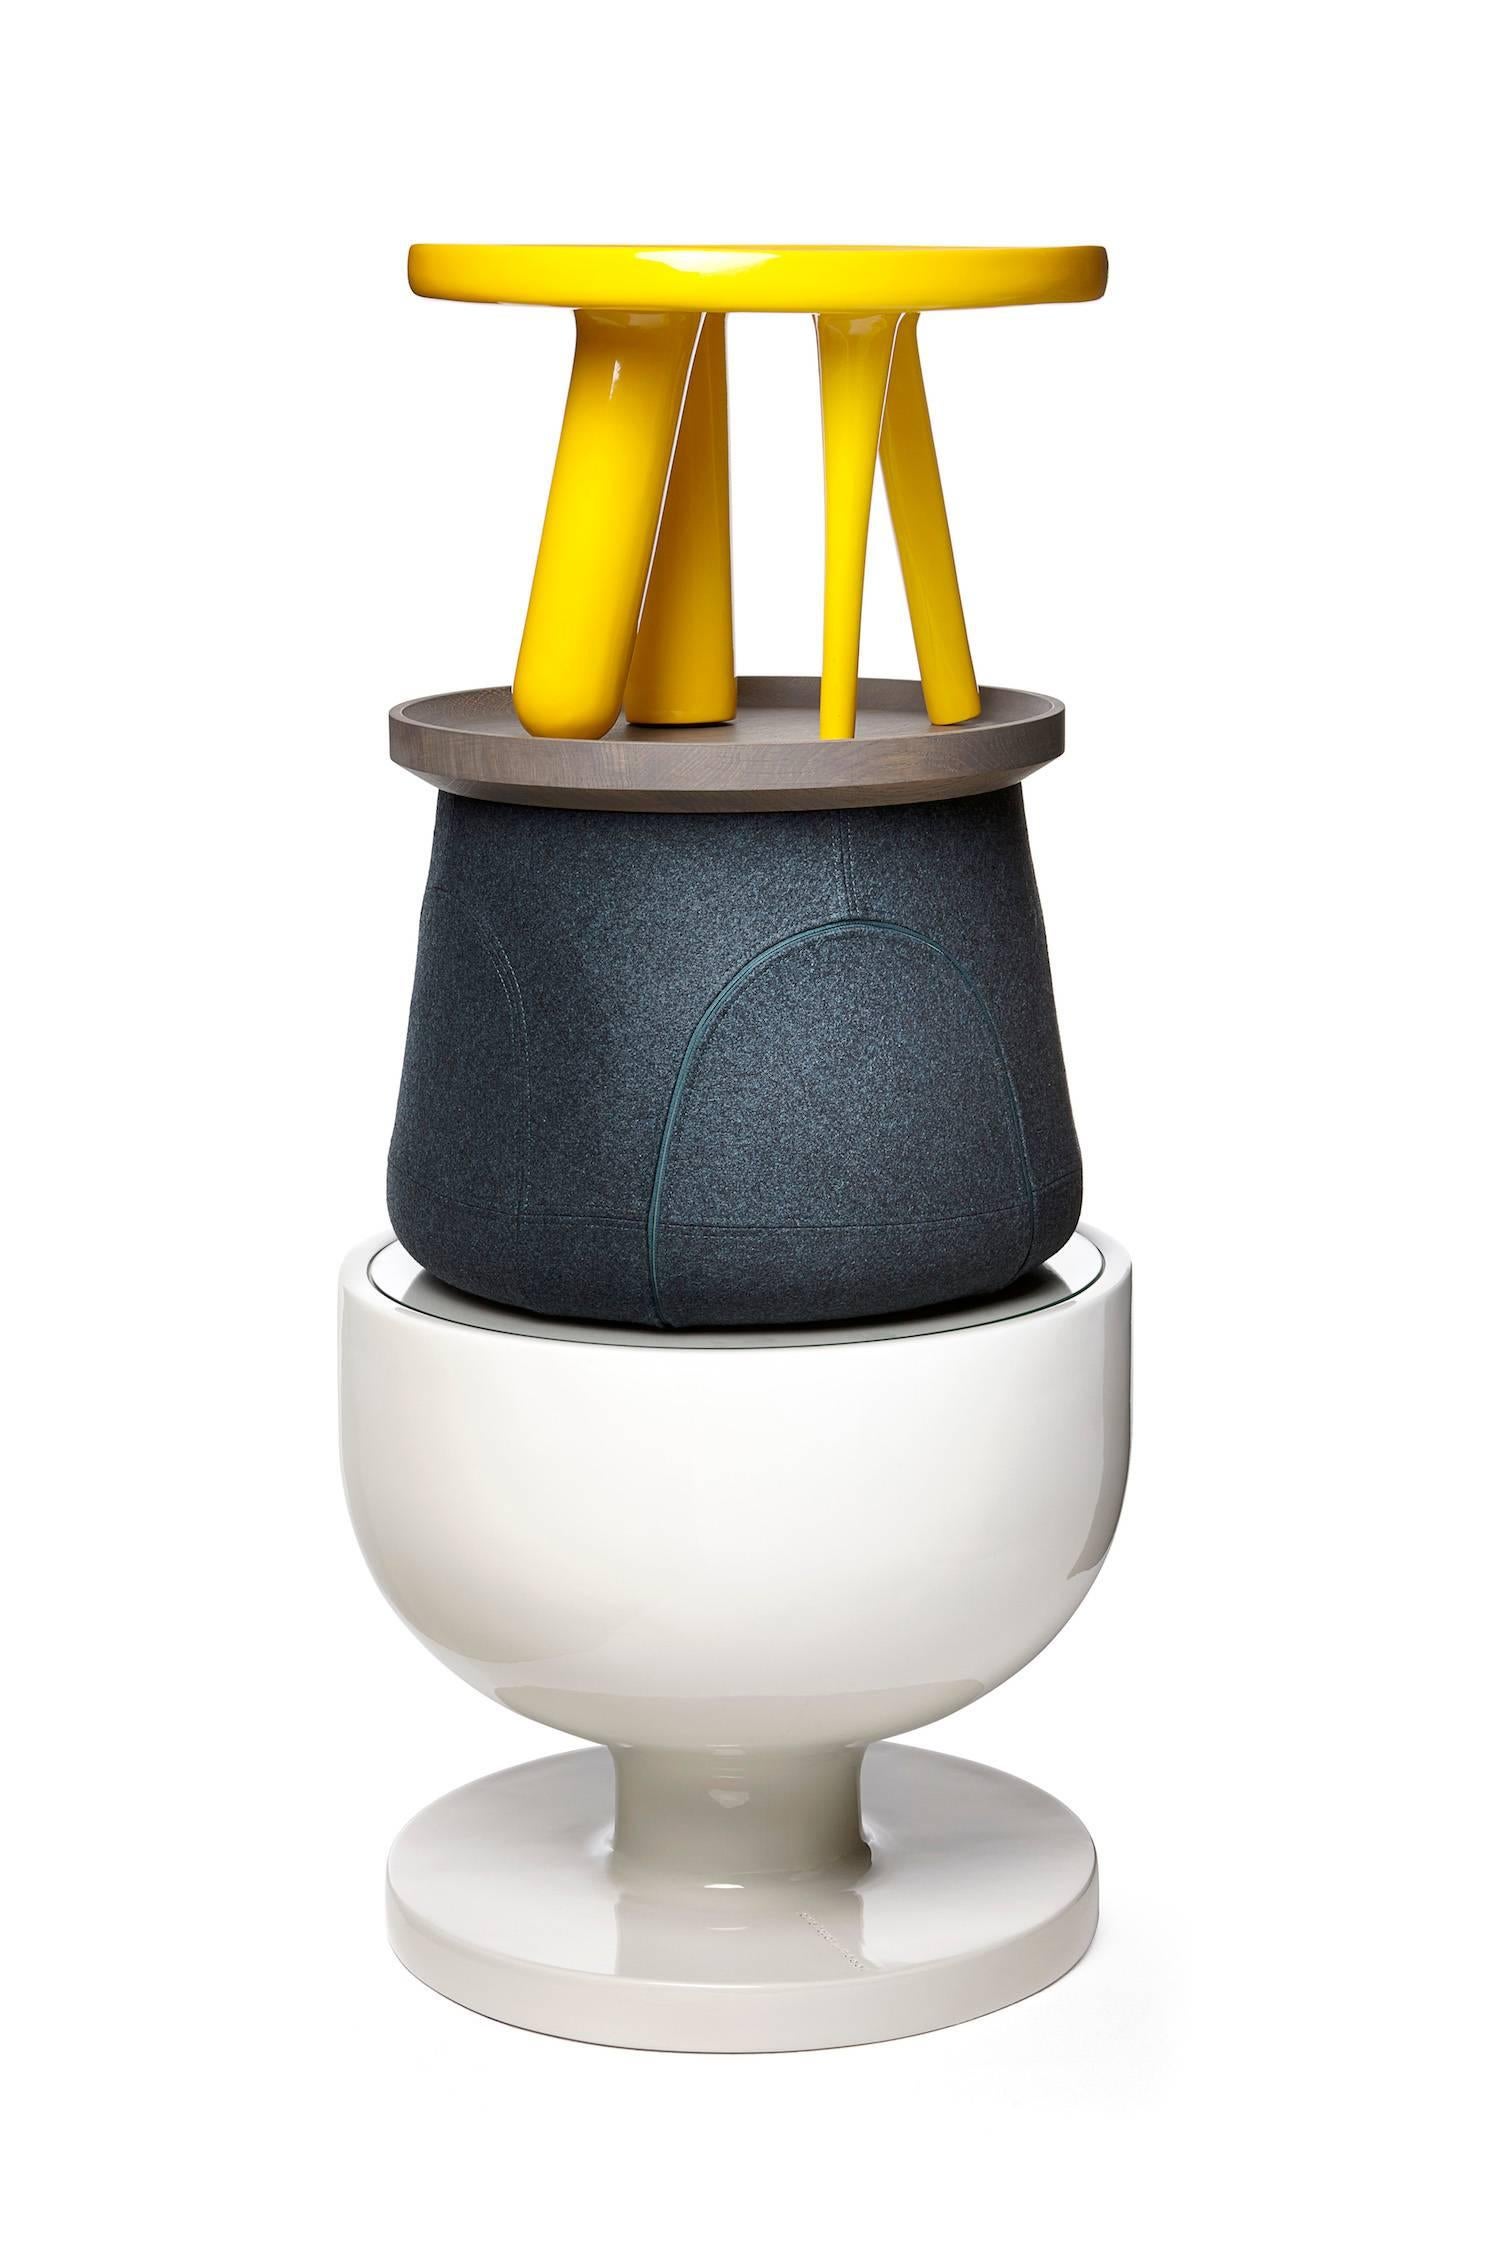 Modern Moooi Elements 002 Table by Jaime Hayon in Yellow, Light Grey or Dark Grey For Sale